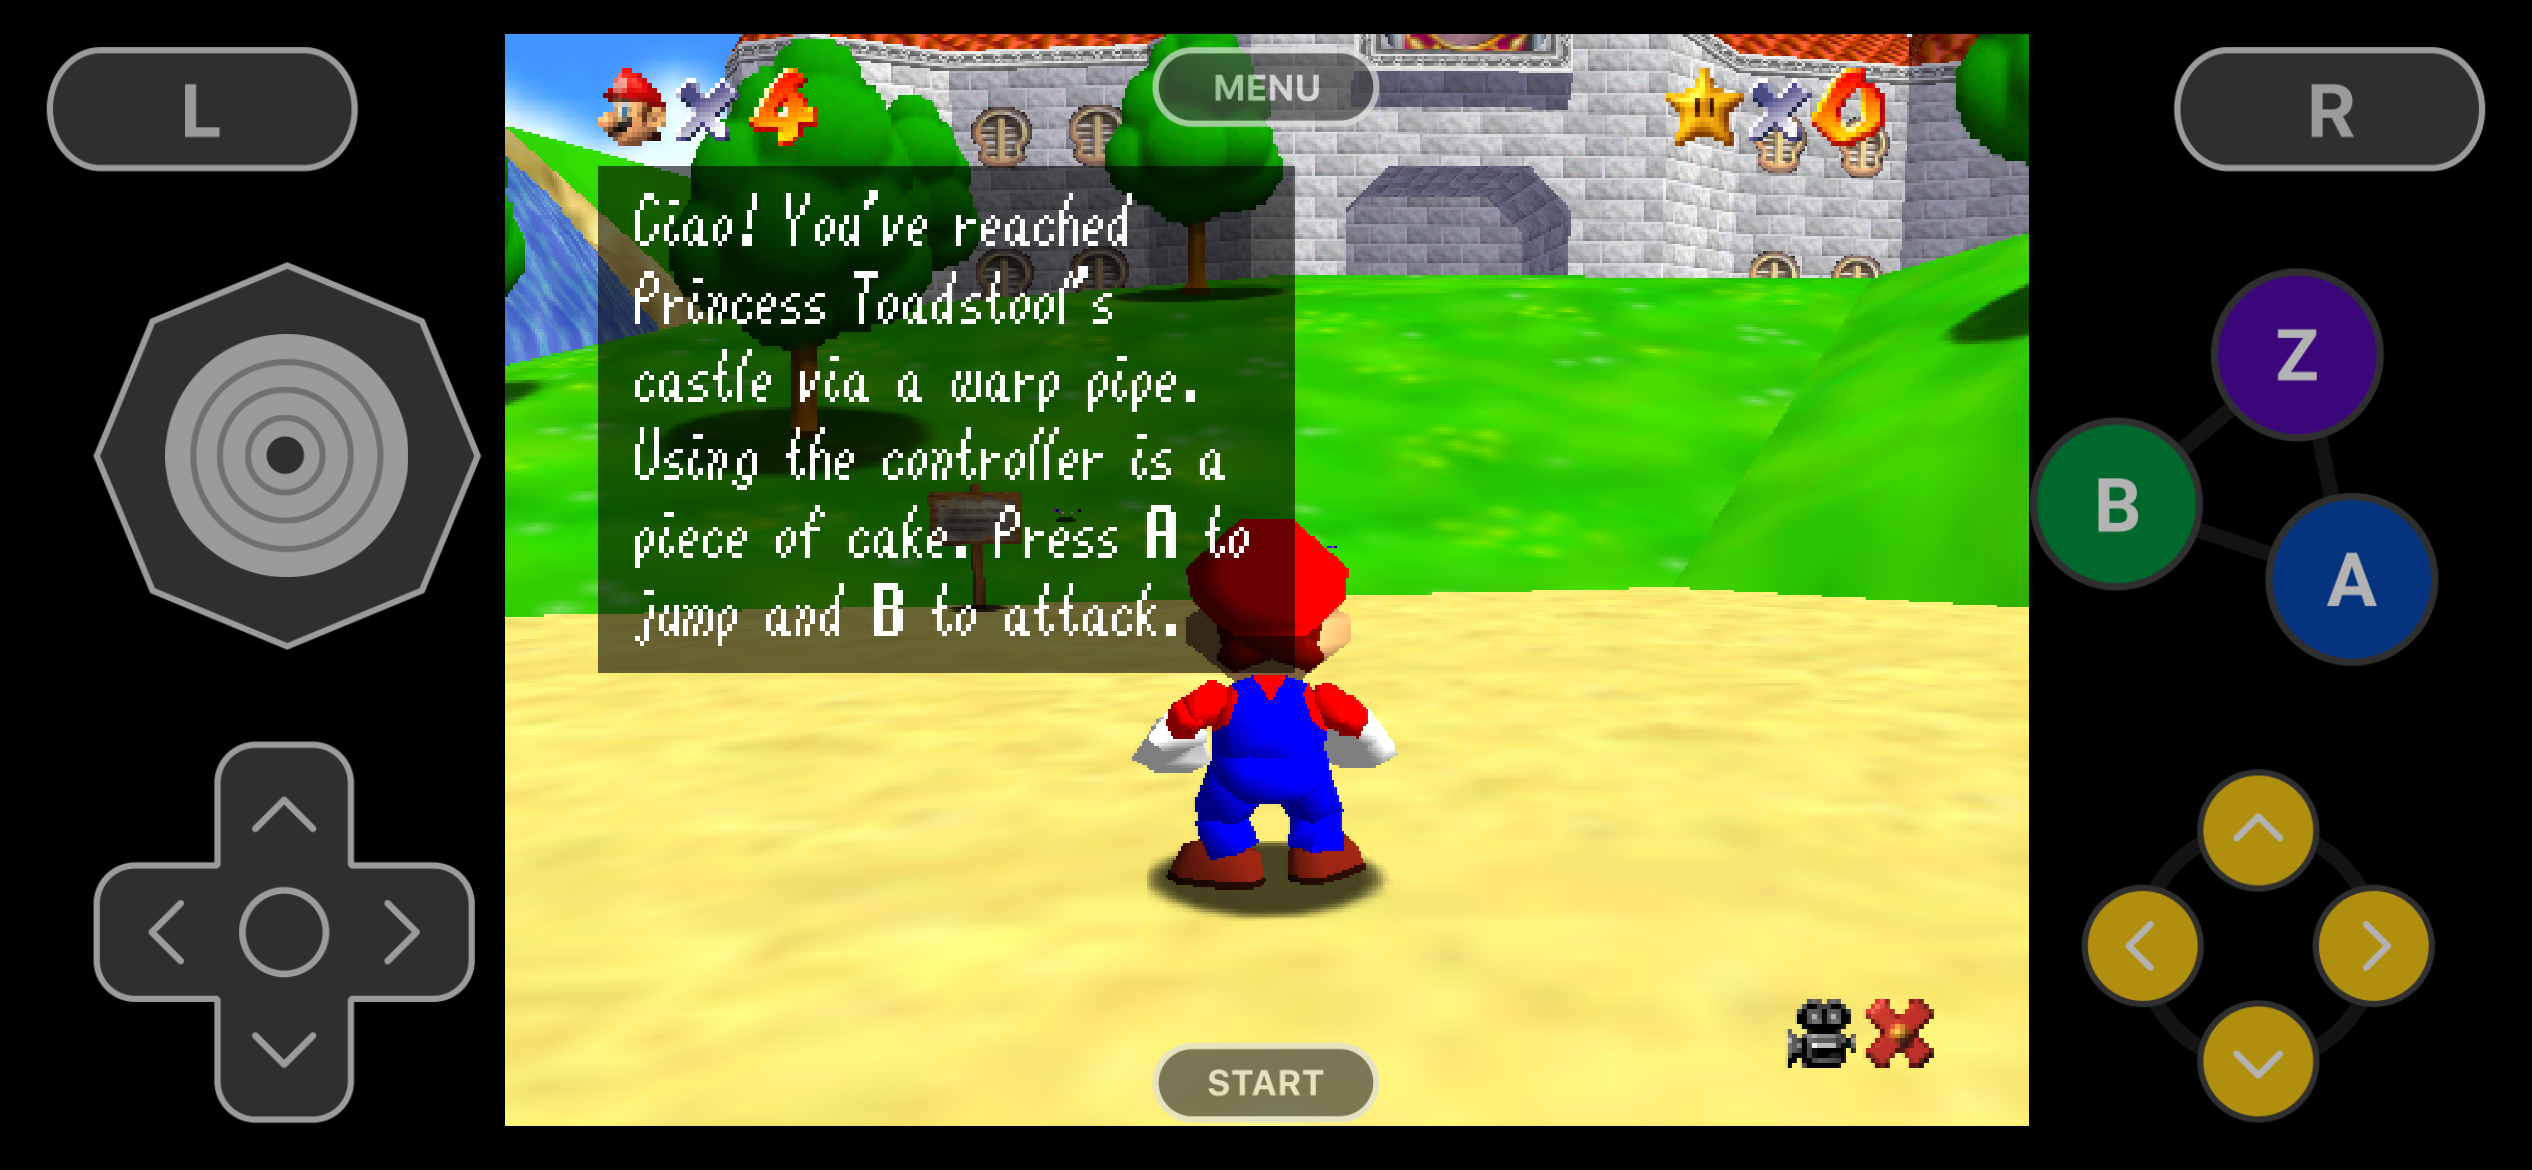 Super Mario 64 on an iPhone with Delta.